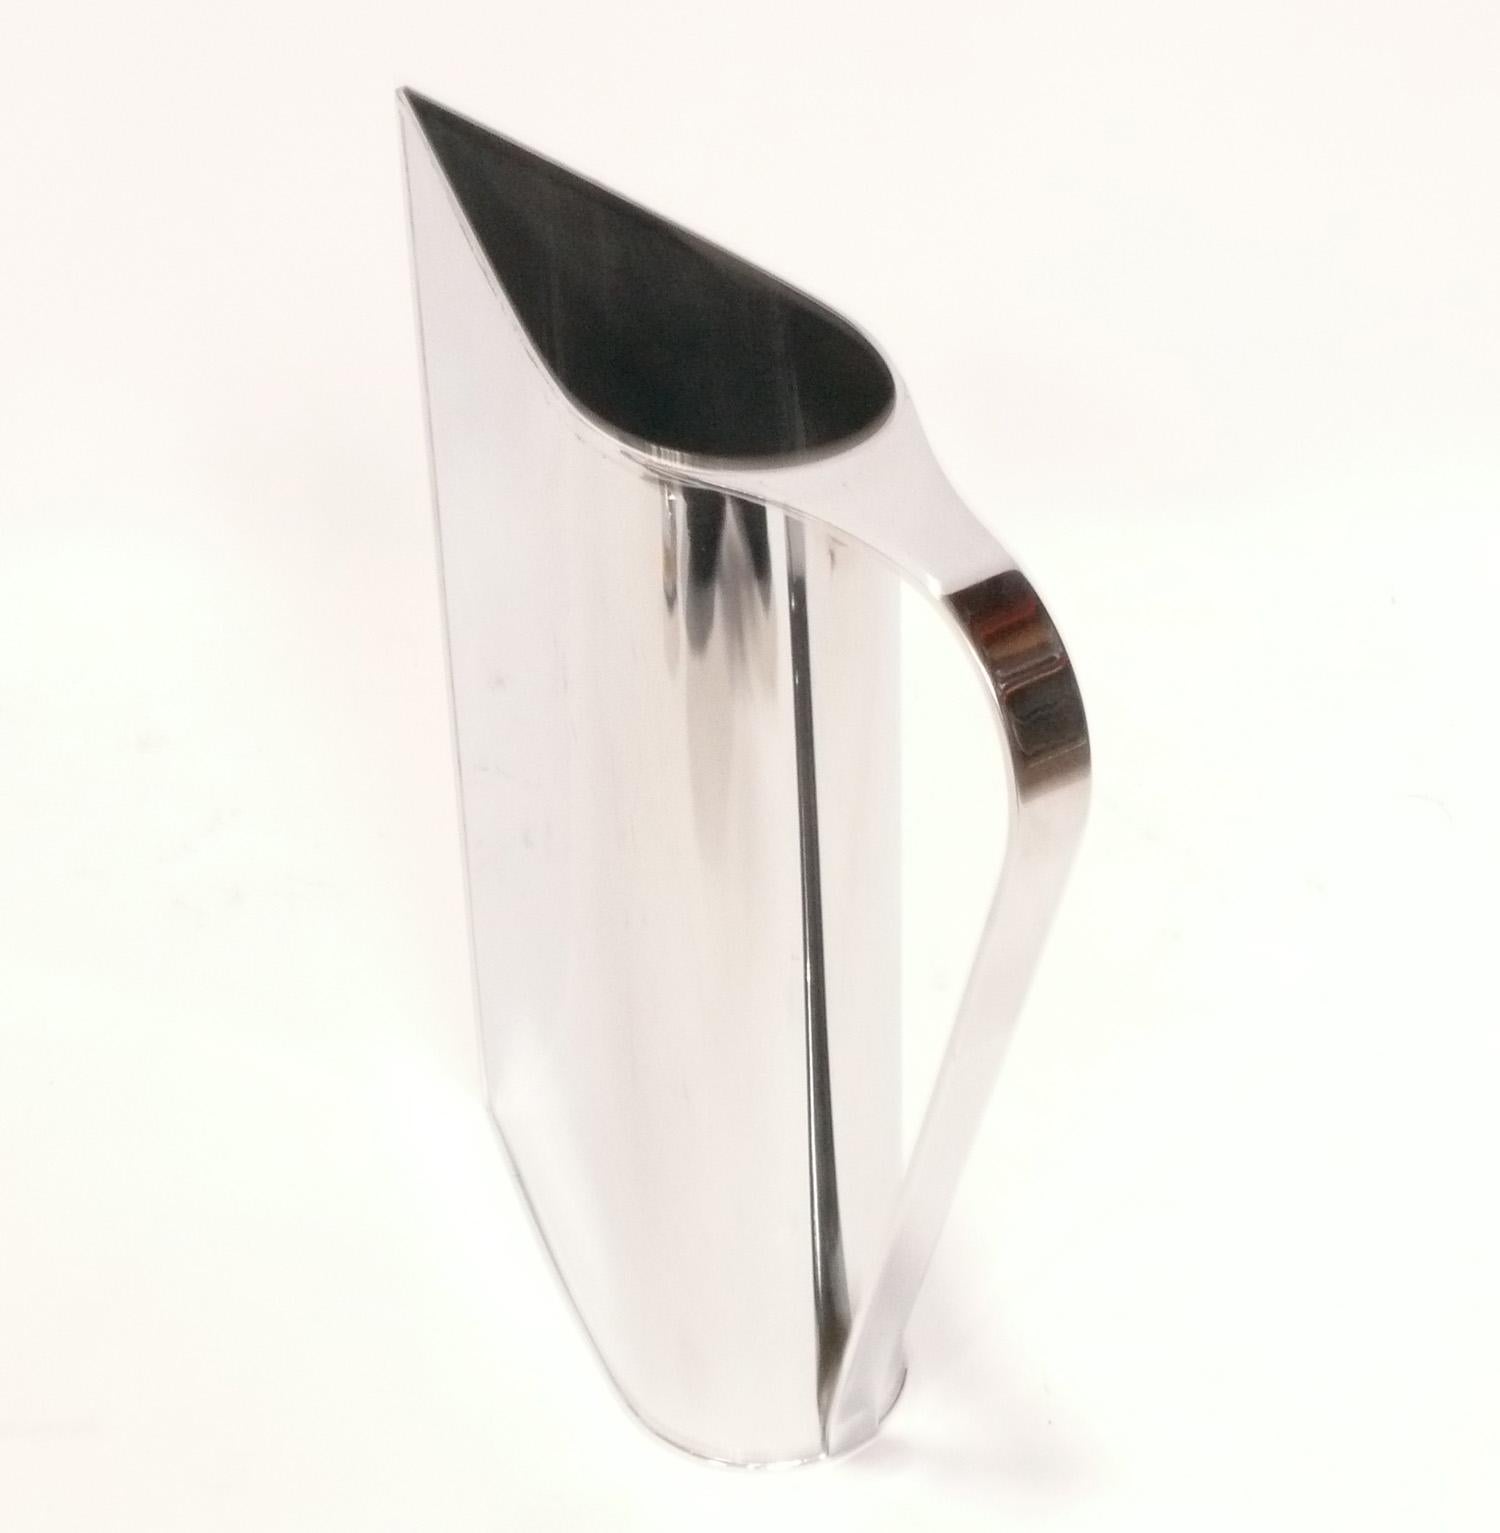 Streamlined Art Deco Normandie Pitcher, designed by Peter Muller Munk for Revere, American, circa 1930s. The design of this pitcher was based on the Art Deco cruise ship The Normandie. This design is held in several major museum collections,